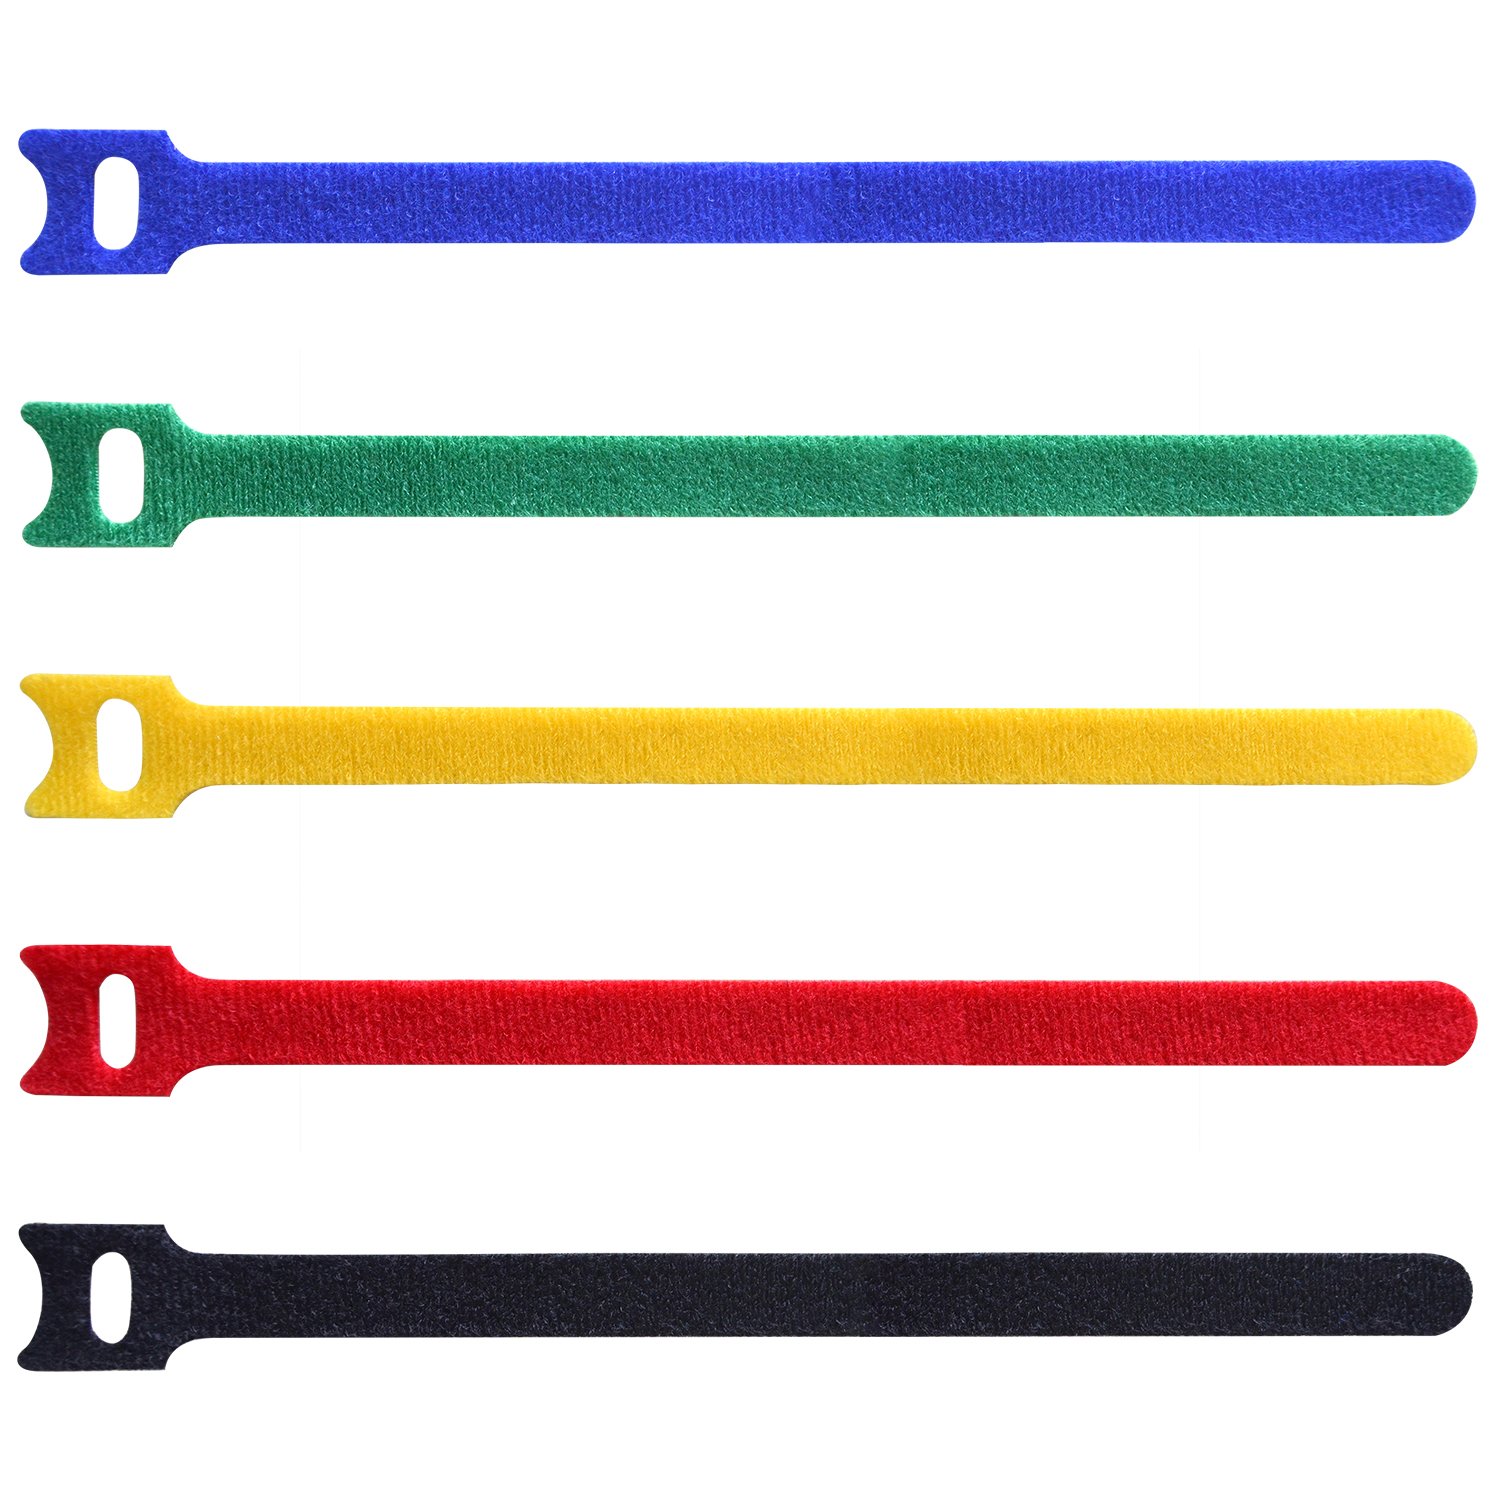 Details about   300x Reusable Knot Cable Ties 4 Inch Wire Straps Adjustable Cord Fastener Nylon 